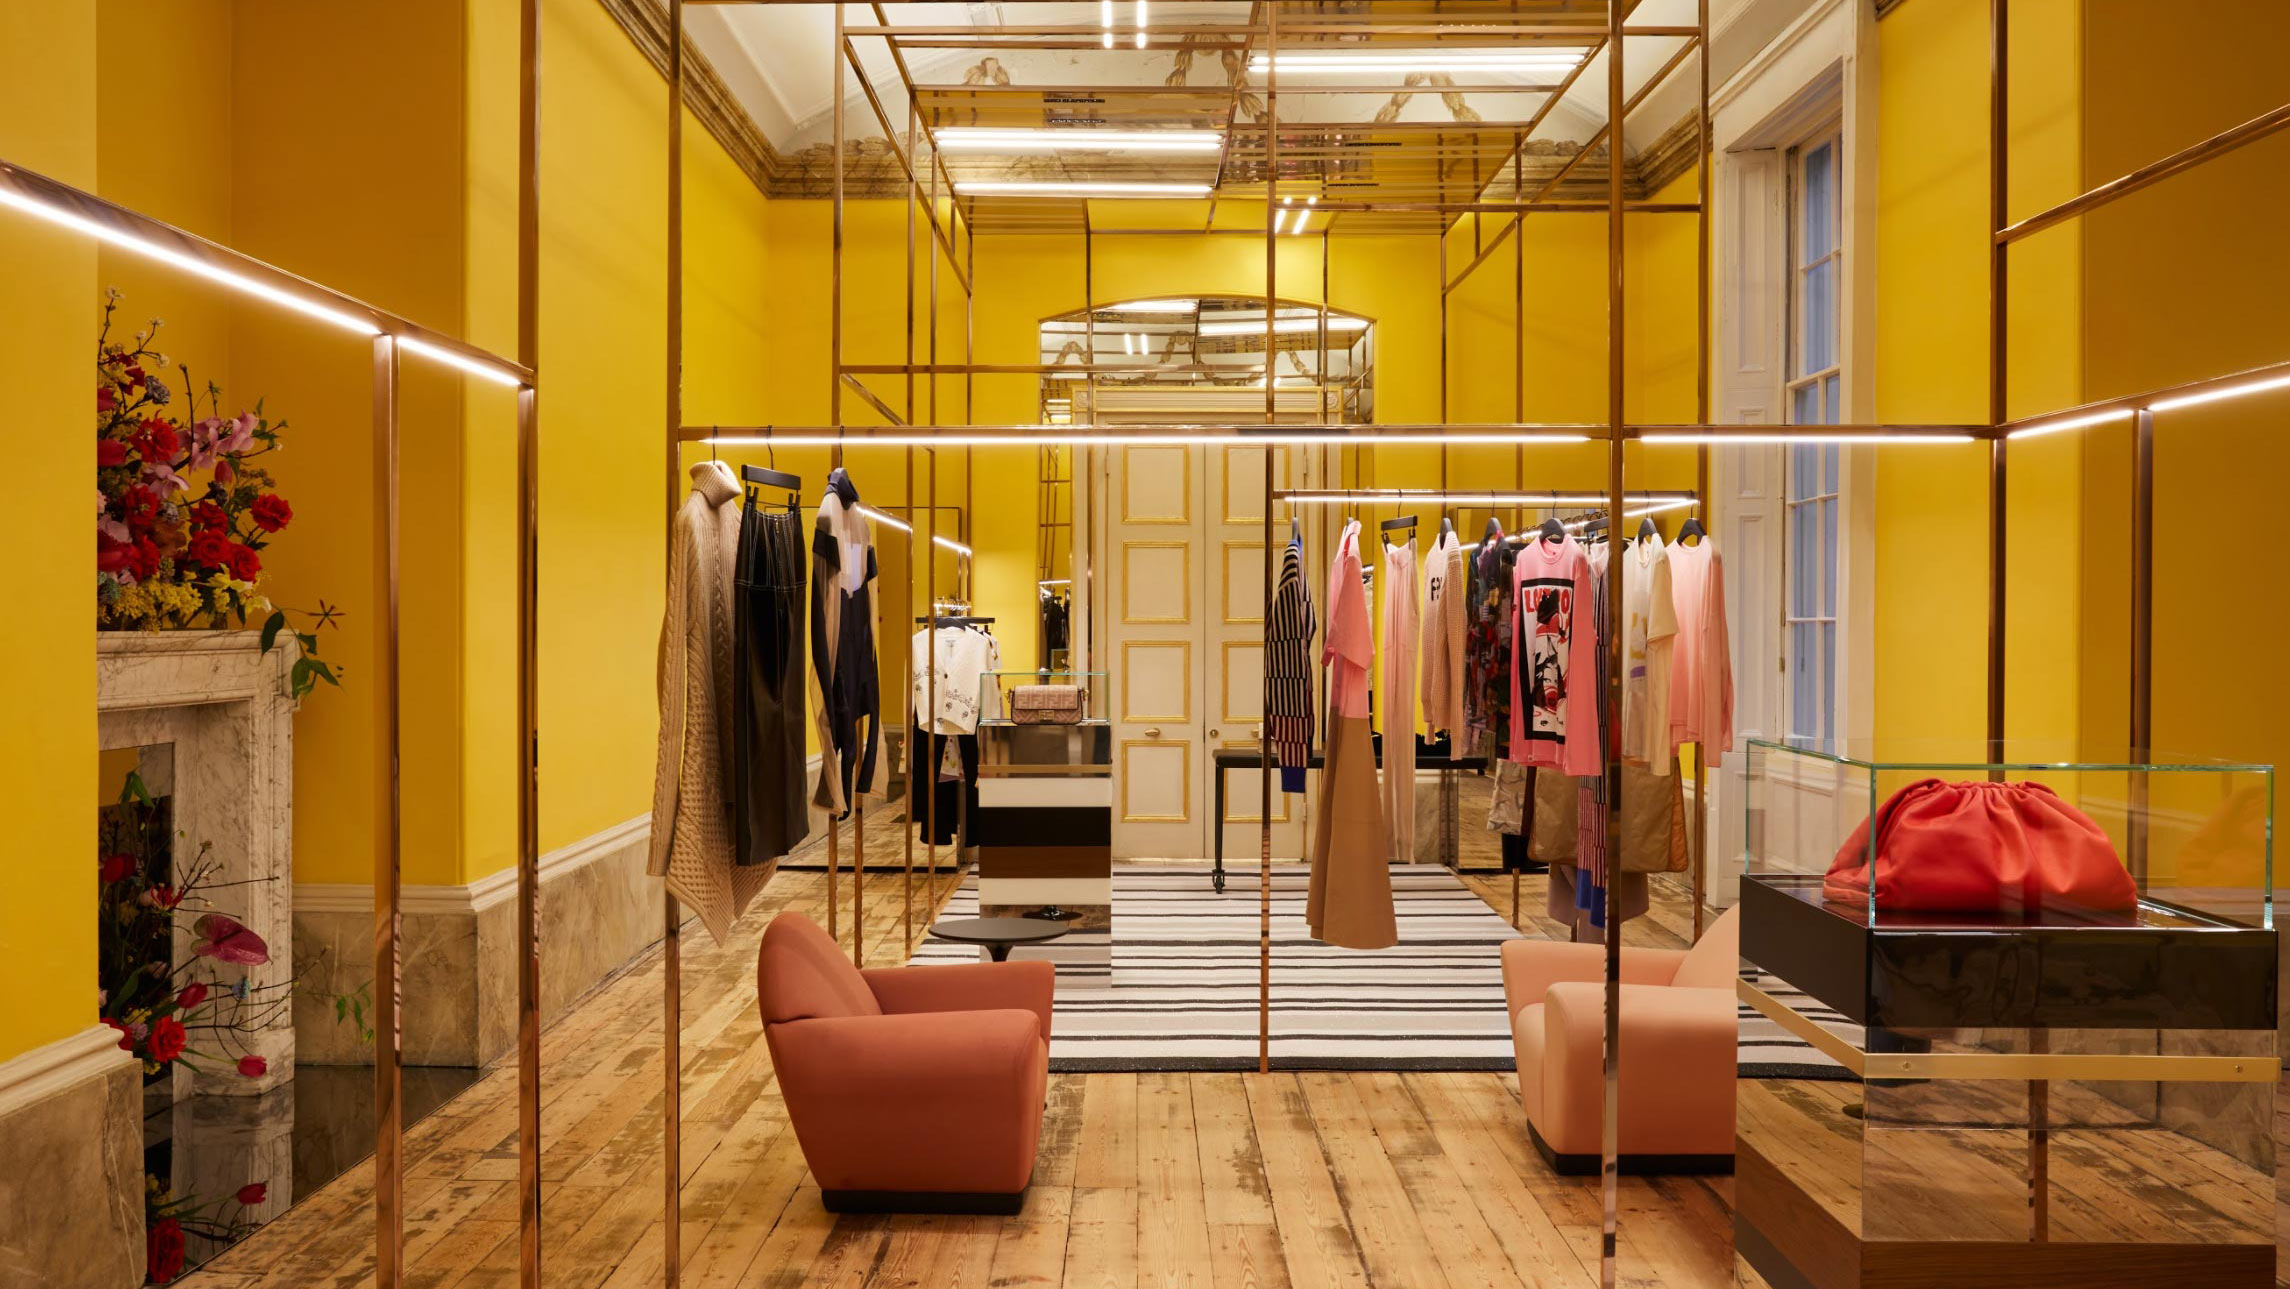 Browns Brook Street Womenswear Yellow Room Fashion Boutique Store Designing Dreams With Dimorestudio